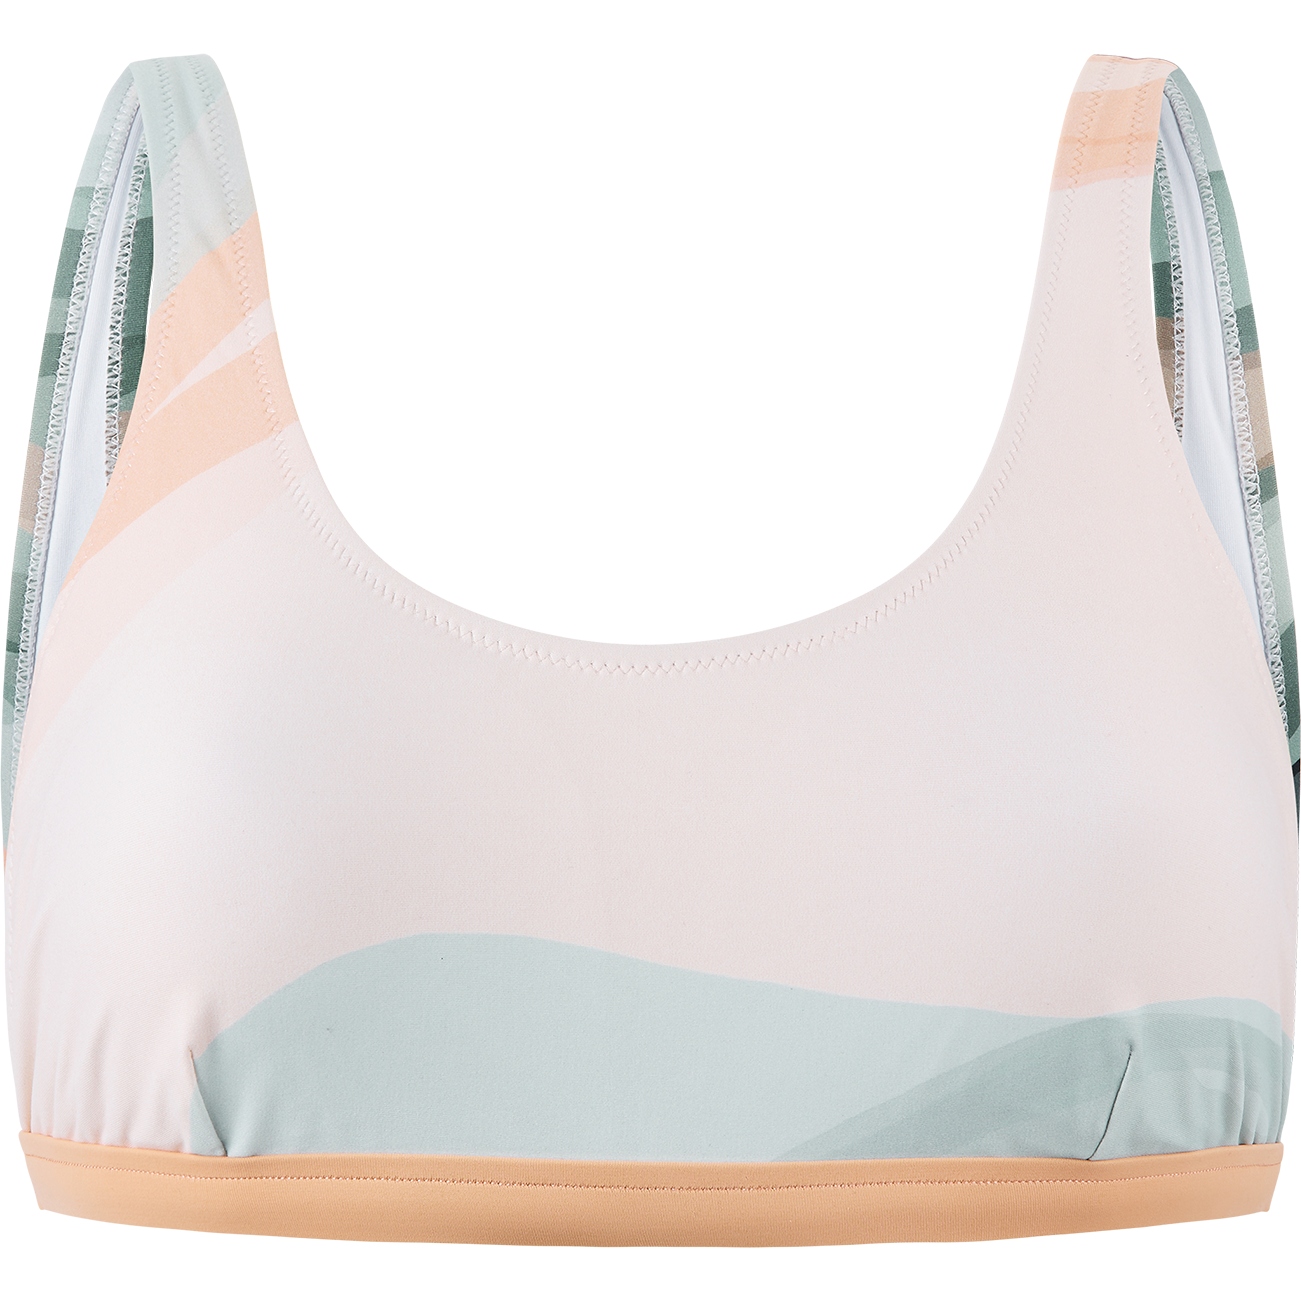 Picture of Picture Clove Print Bralette Top Women - Mirage